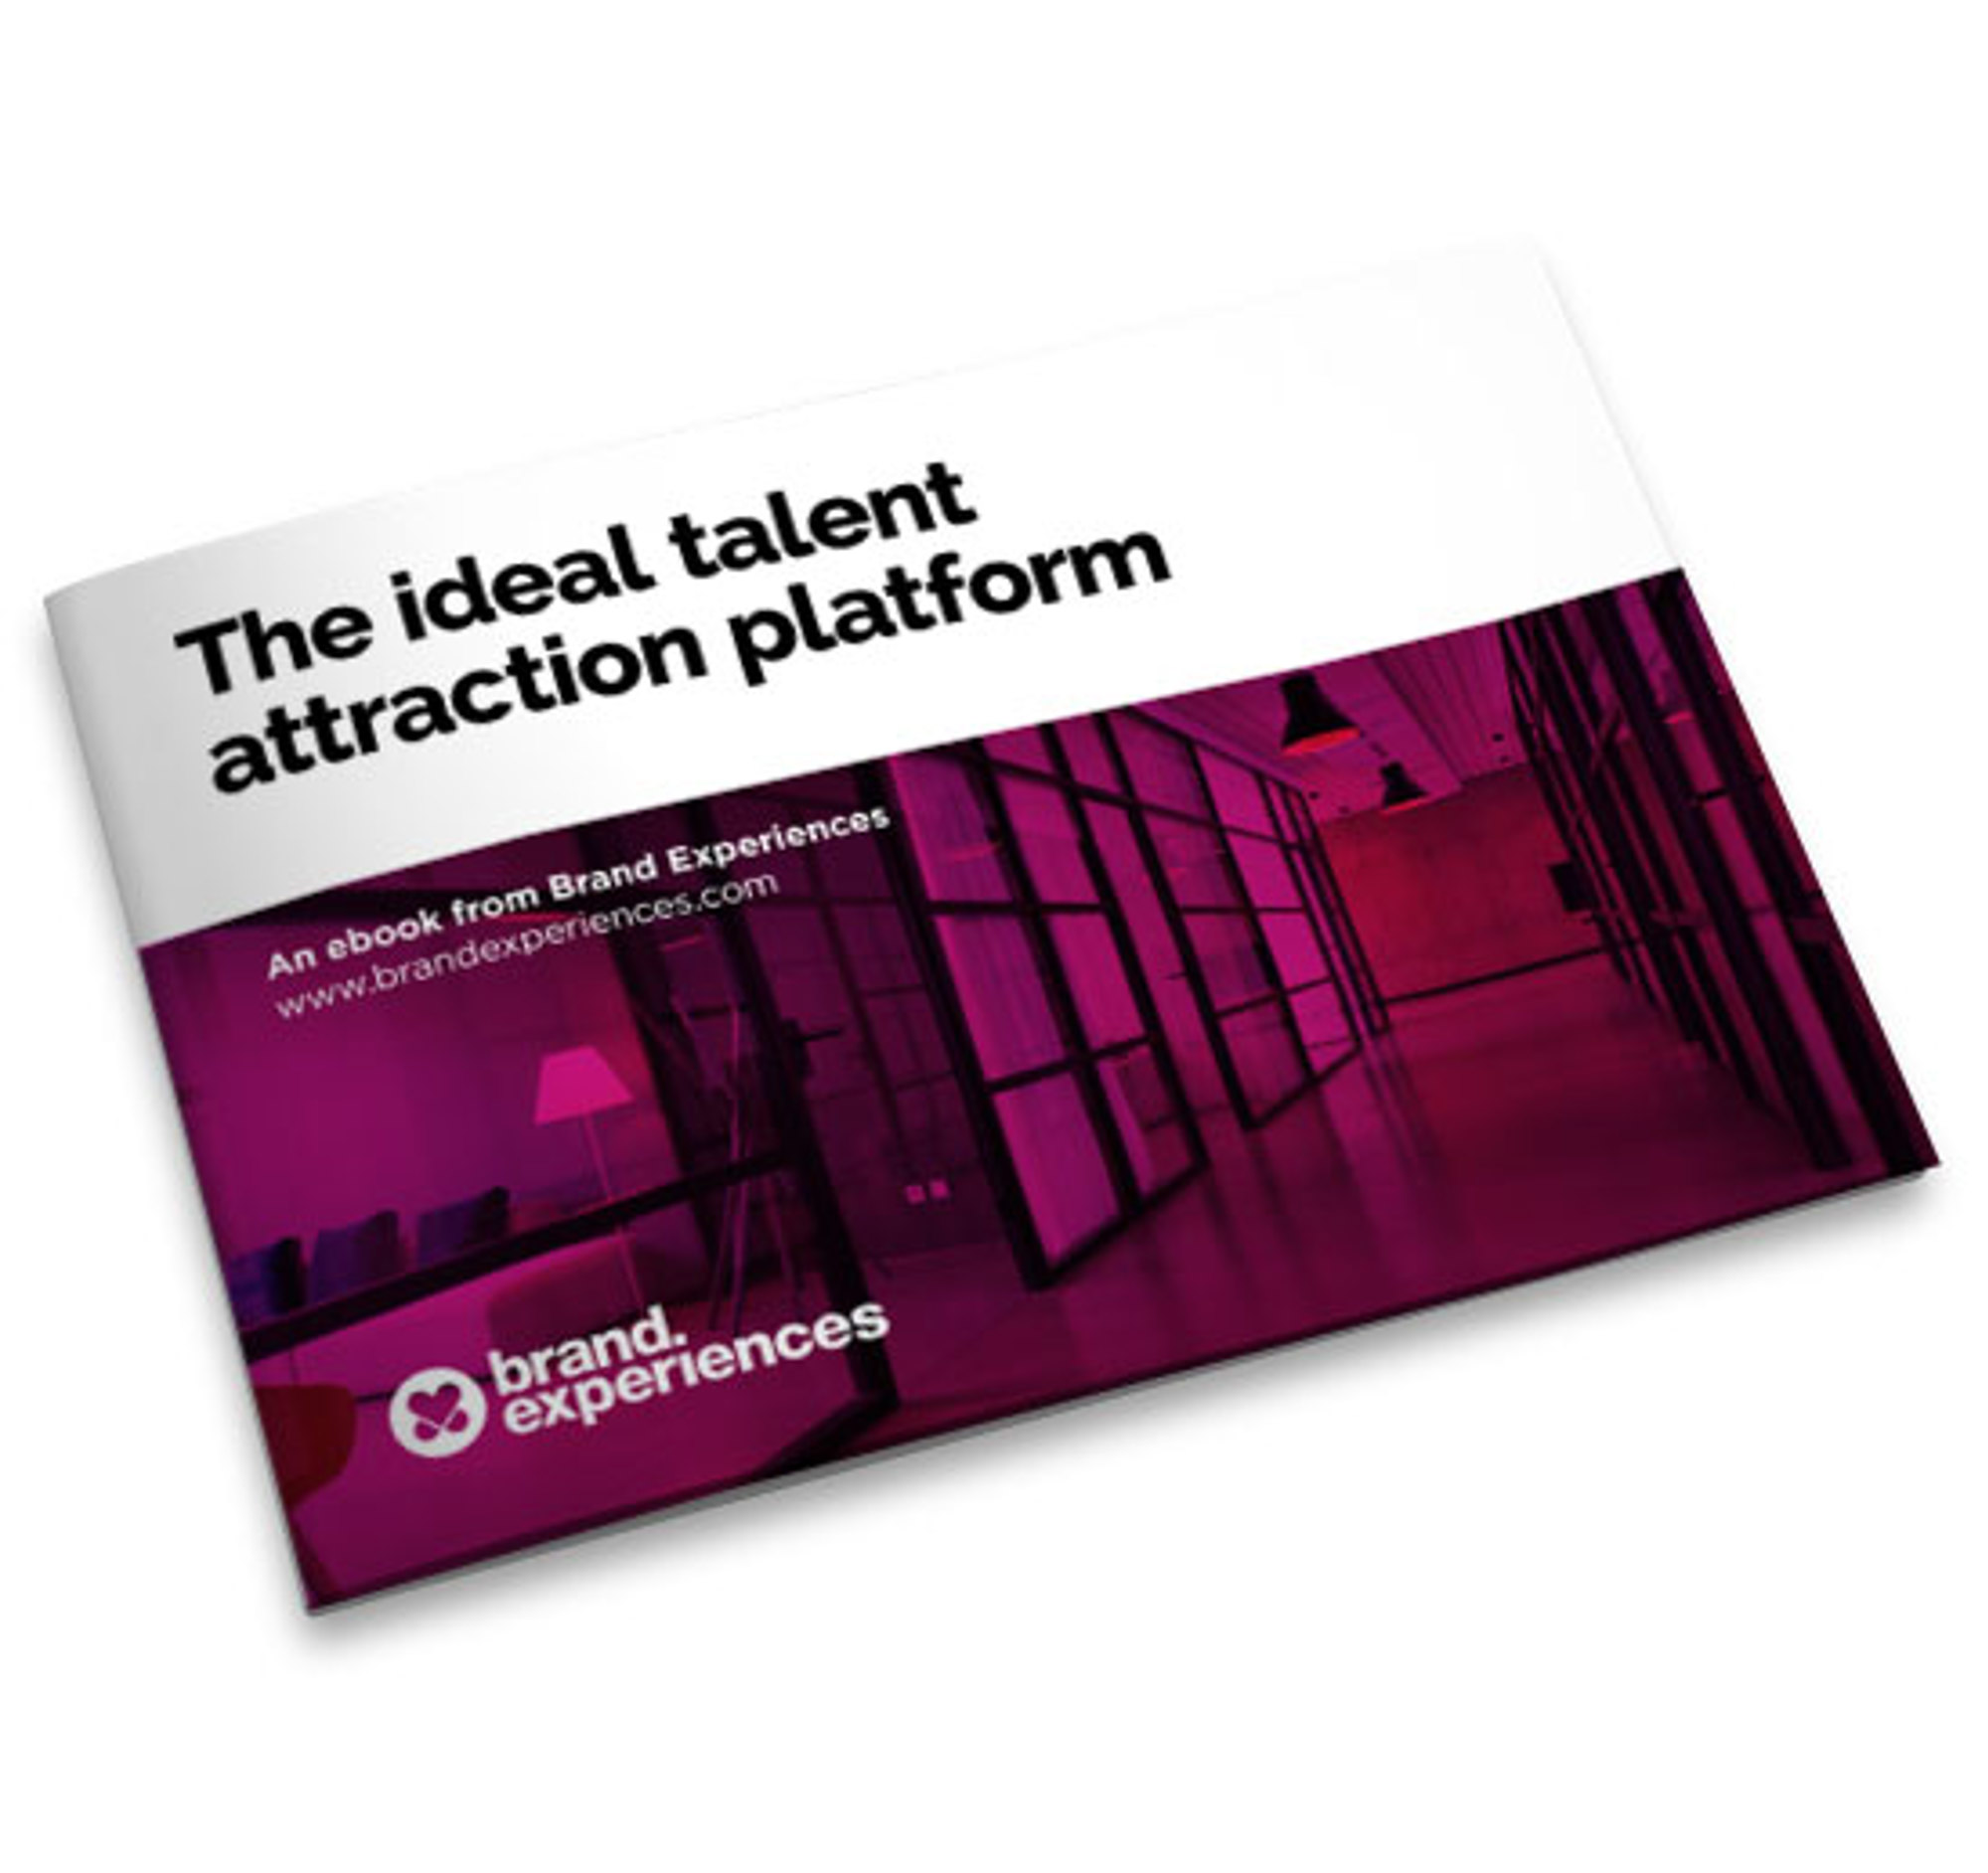 The ideal talent attraction platform